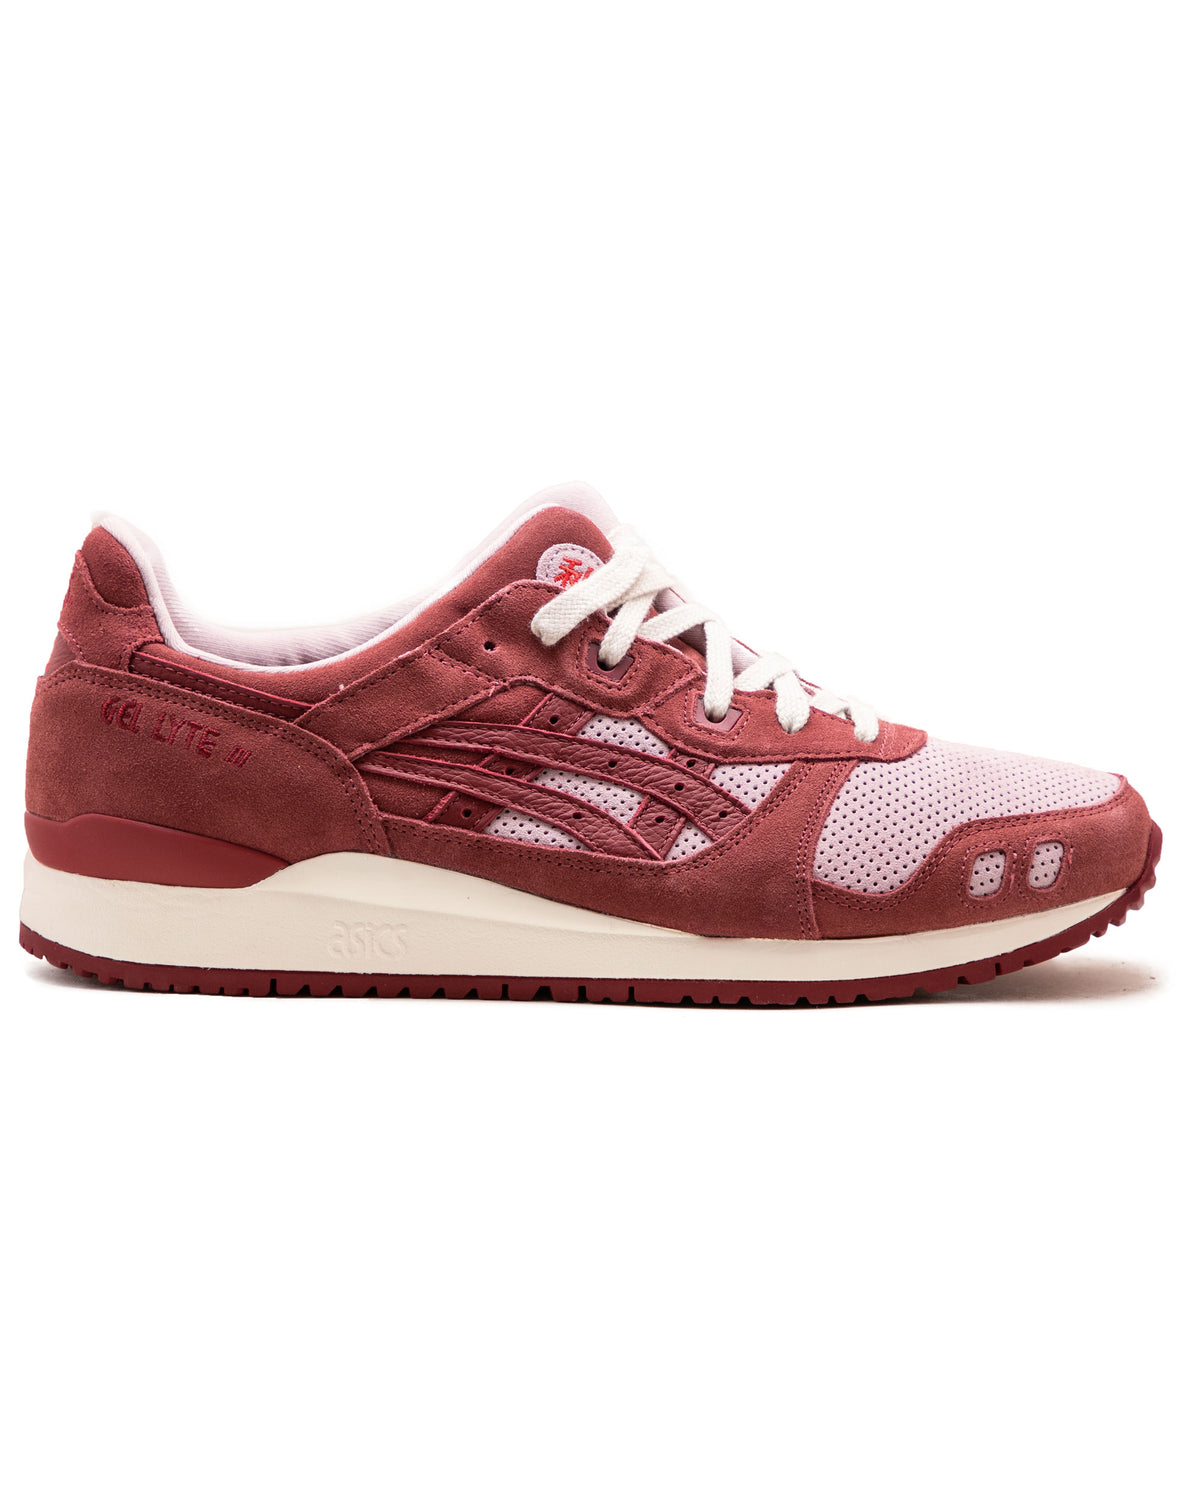 ASICS Gel-Lyte III OG Changing of the Seasons Pack Fall Watershed Rose/Beet Red